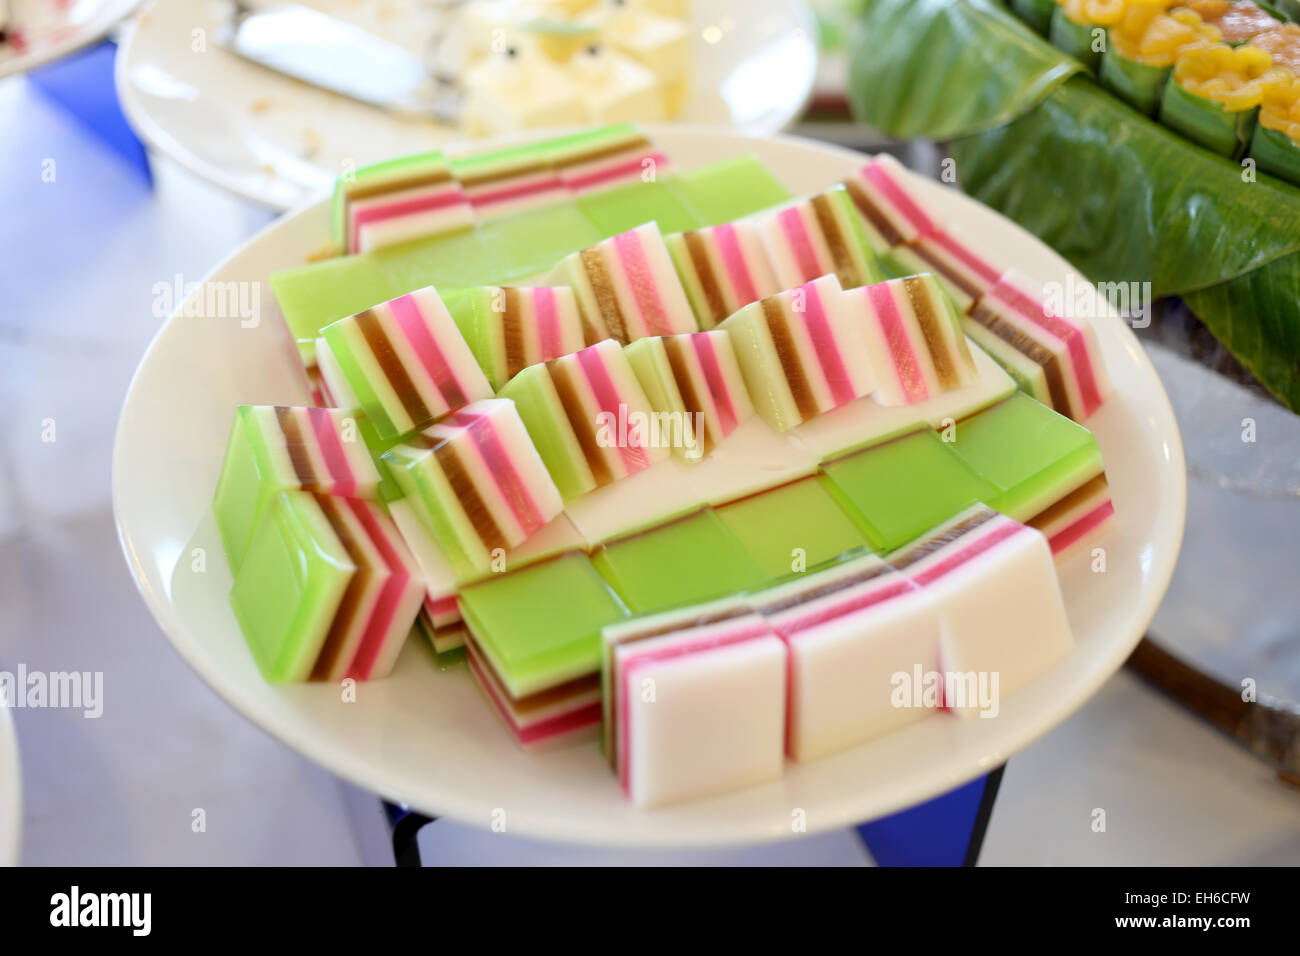 Desserts of colorful on dish in the restaurant. Stock Photo